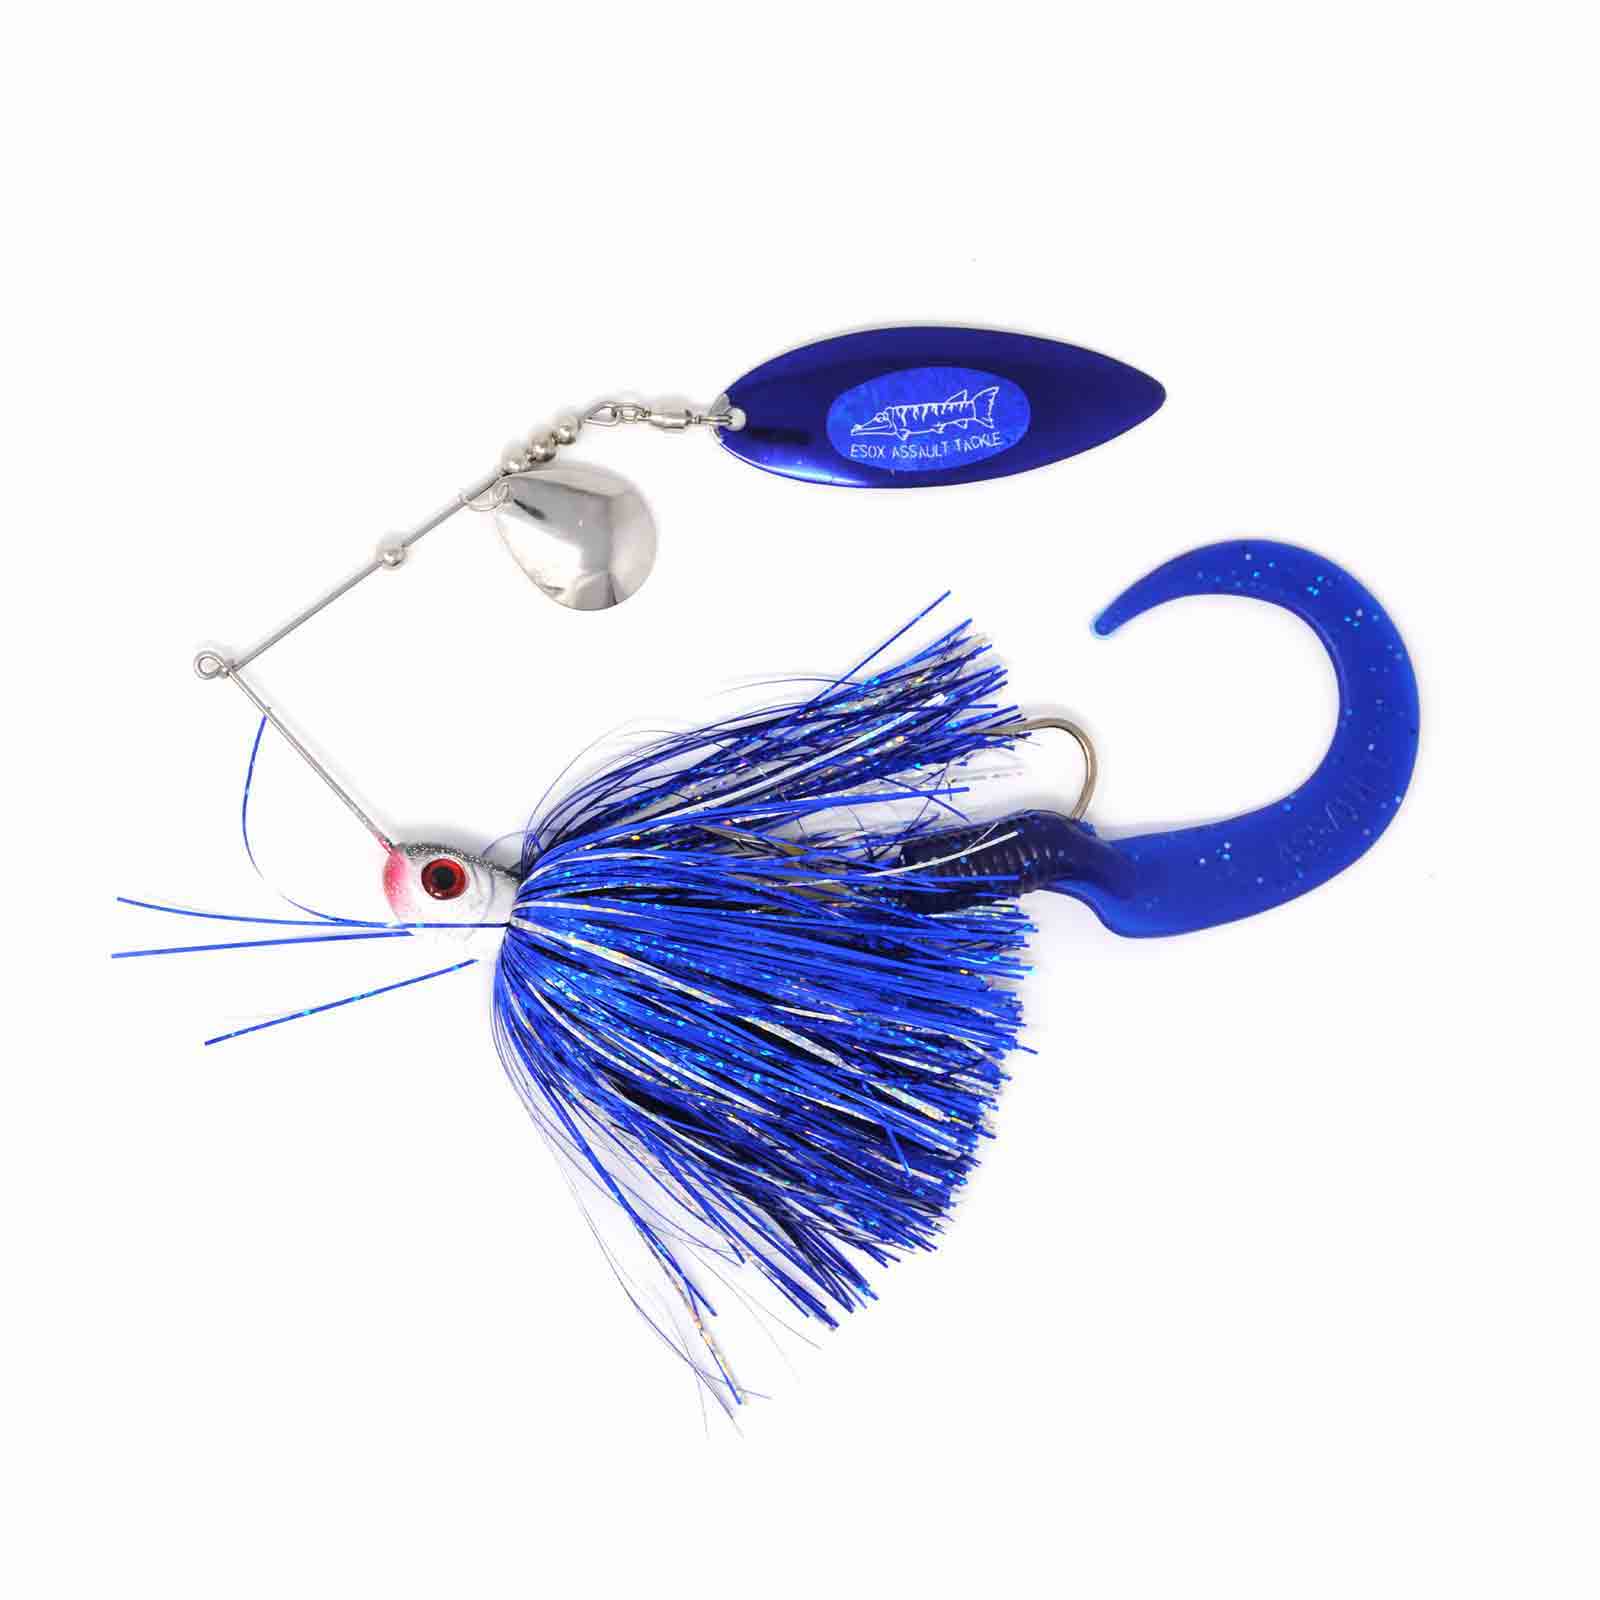 View of Spinnerbaits Esox Assault Spinnerbait Willow 1.5oz Blue Shimmer available at EZOKO Pike and Musky Shop